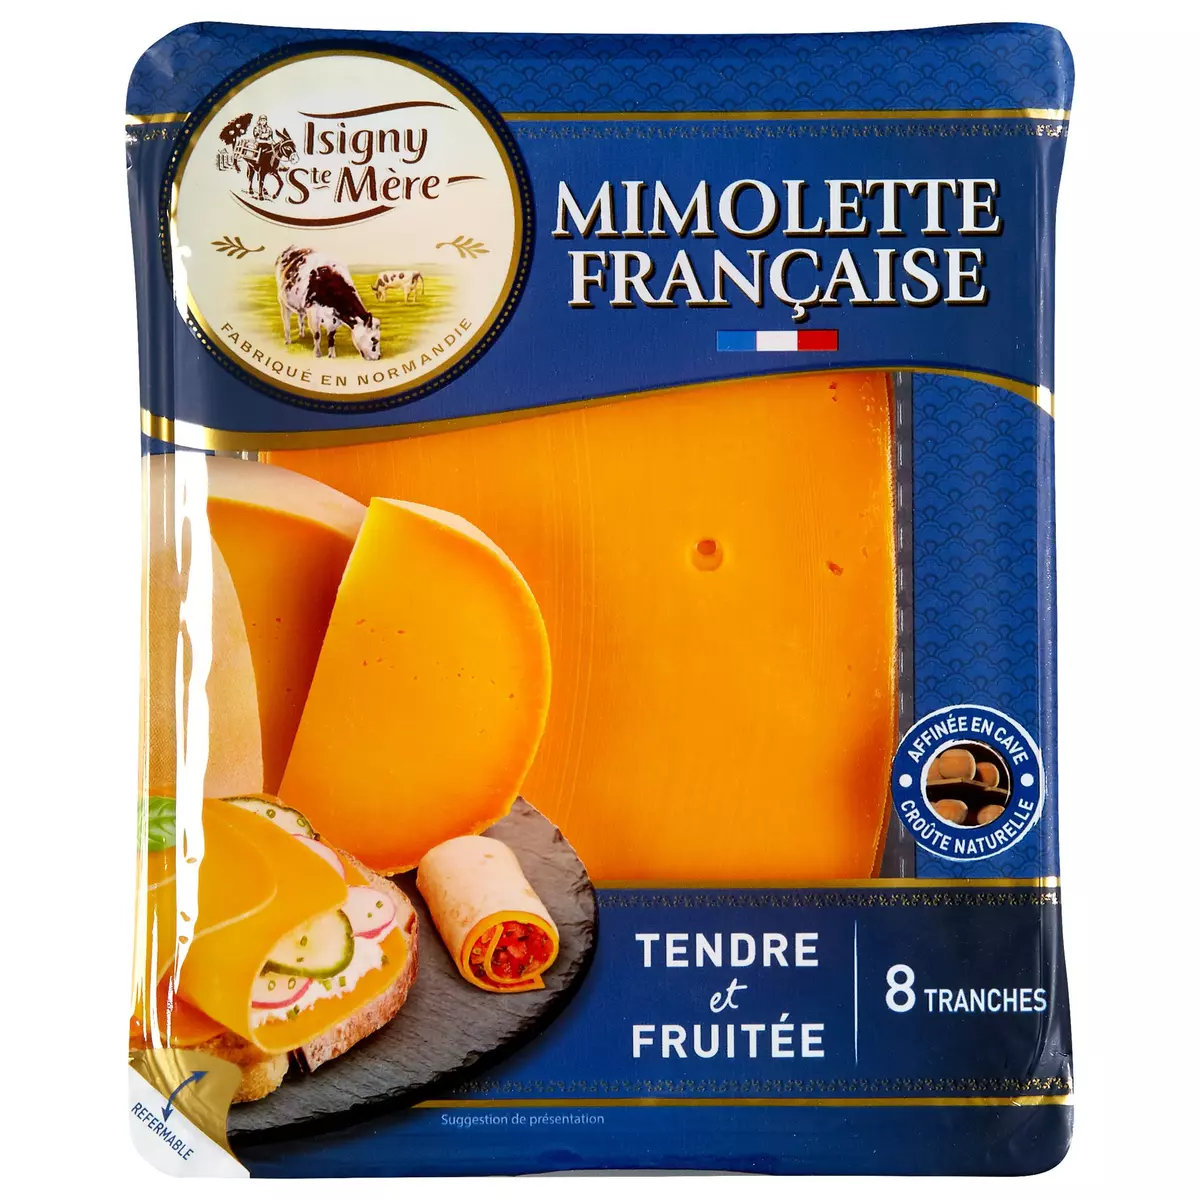 ISIGNY STE MERE Mimolette française 8 tranches 150g